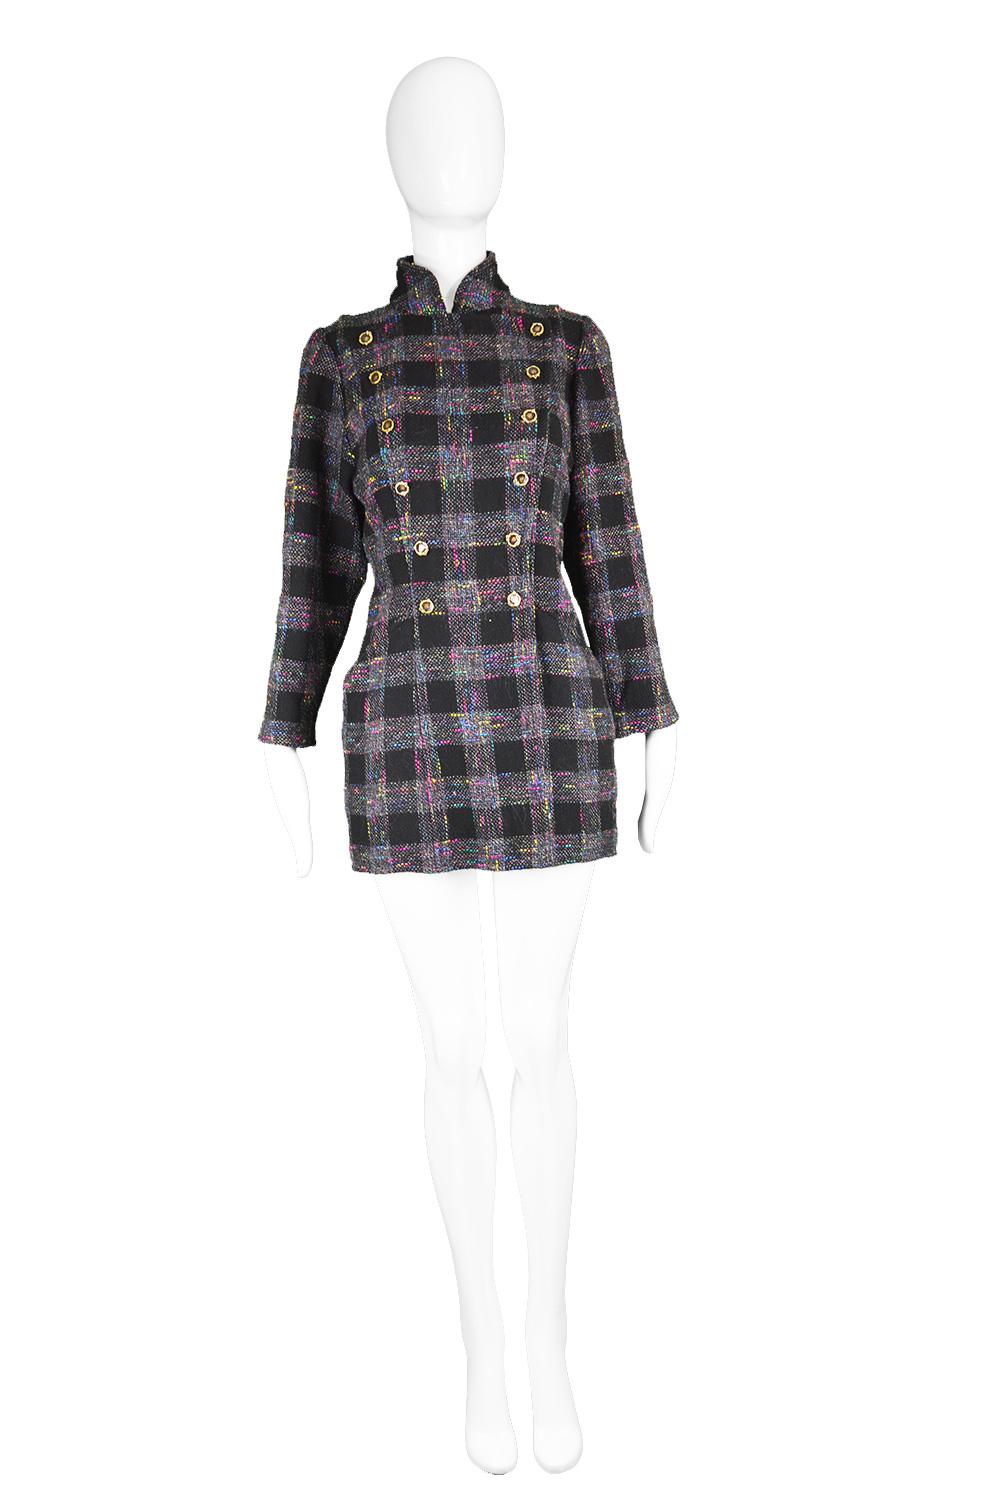 A chic vintage women's jacket from the 80s by luxury Italian fashion designer, Emanuel Ungaro. In a black wool boucle tweed with a plaid check pattern and multicolored flecks throughout. With a high collar and ornate double breasted buttons that